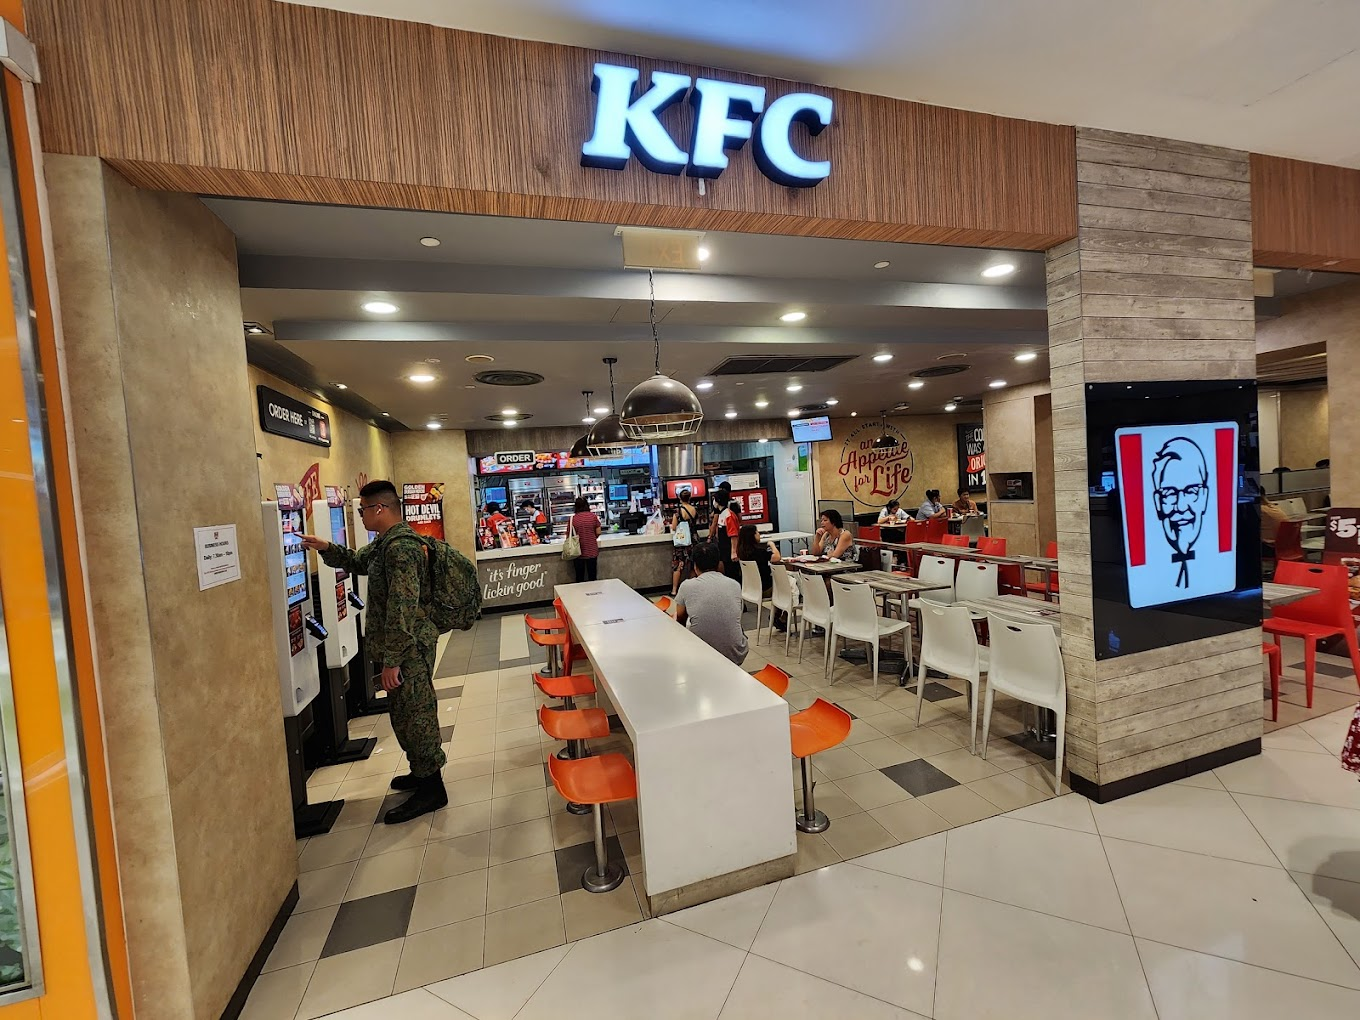 Kfc outlet in lot one, singapore